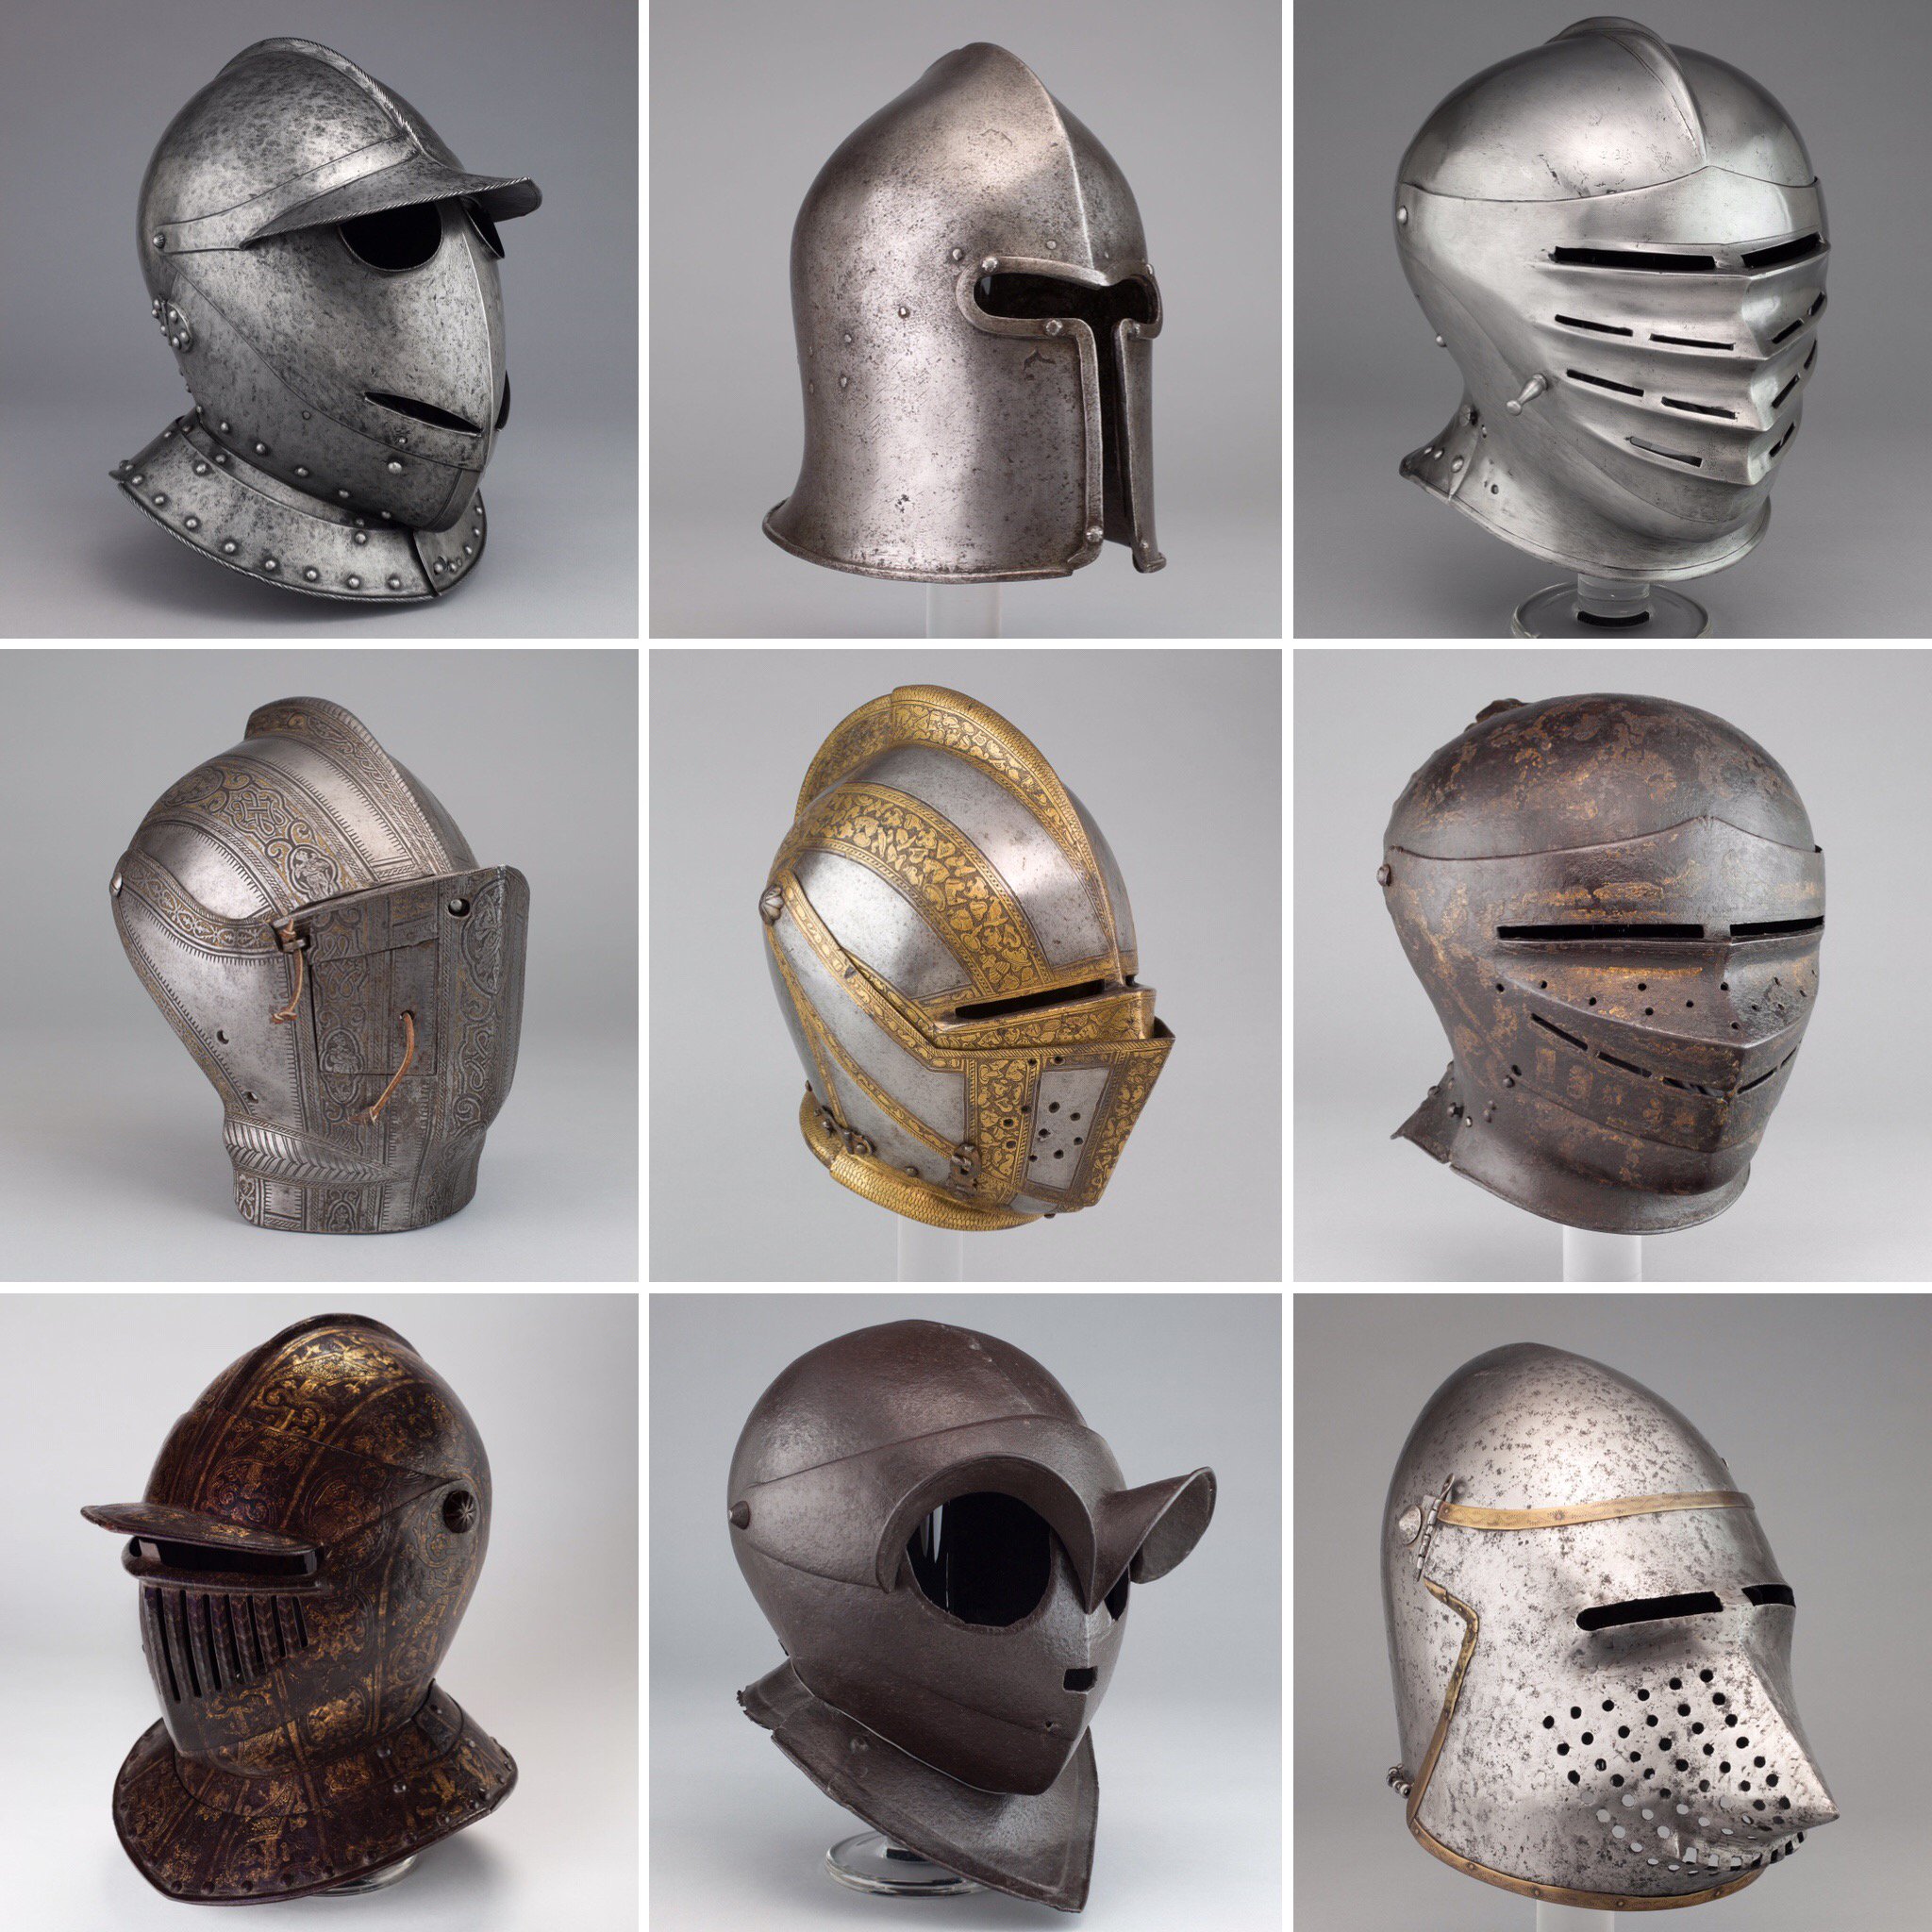 The Art Institute Of Chicago On Twitter Dozens Of Helmets Designed For Combat Tournament And Jousting Go Head To Head In Medieval And Renaissance Art Arms And Armor Nowonview Https T Co 2ljjaj8f4a